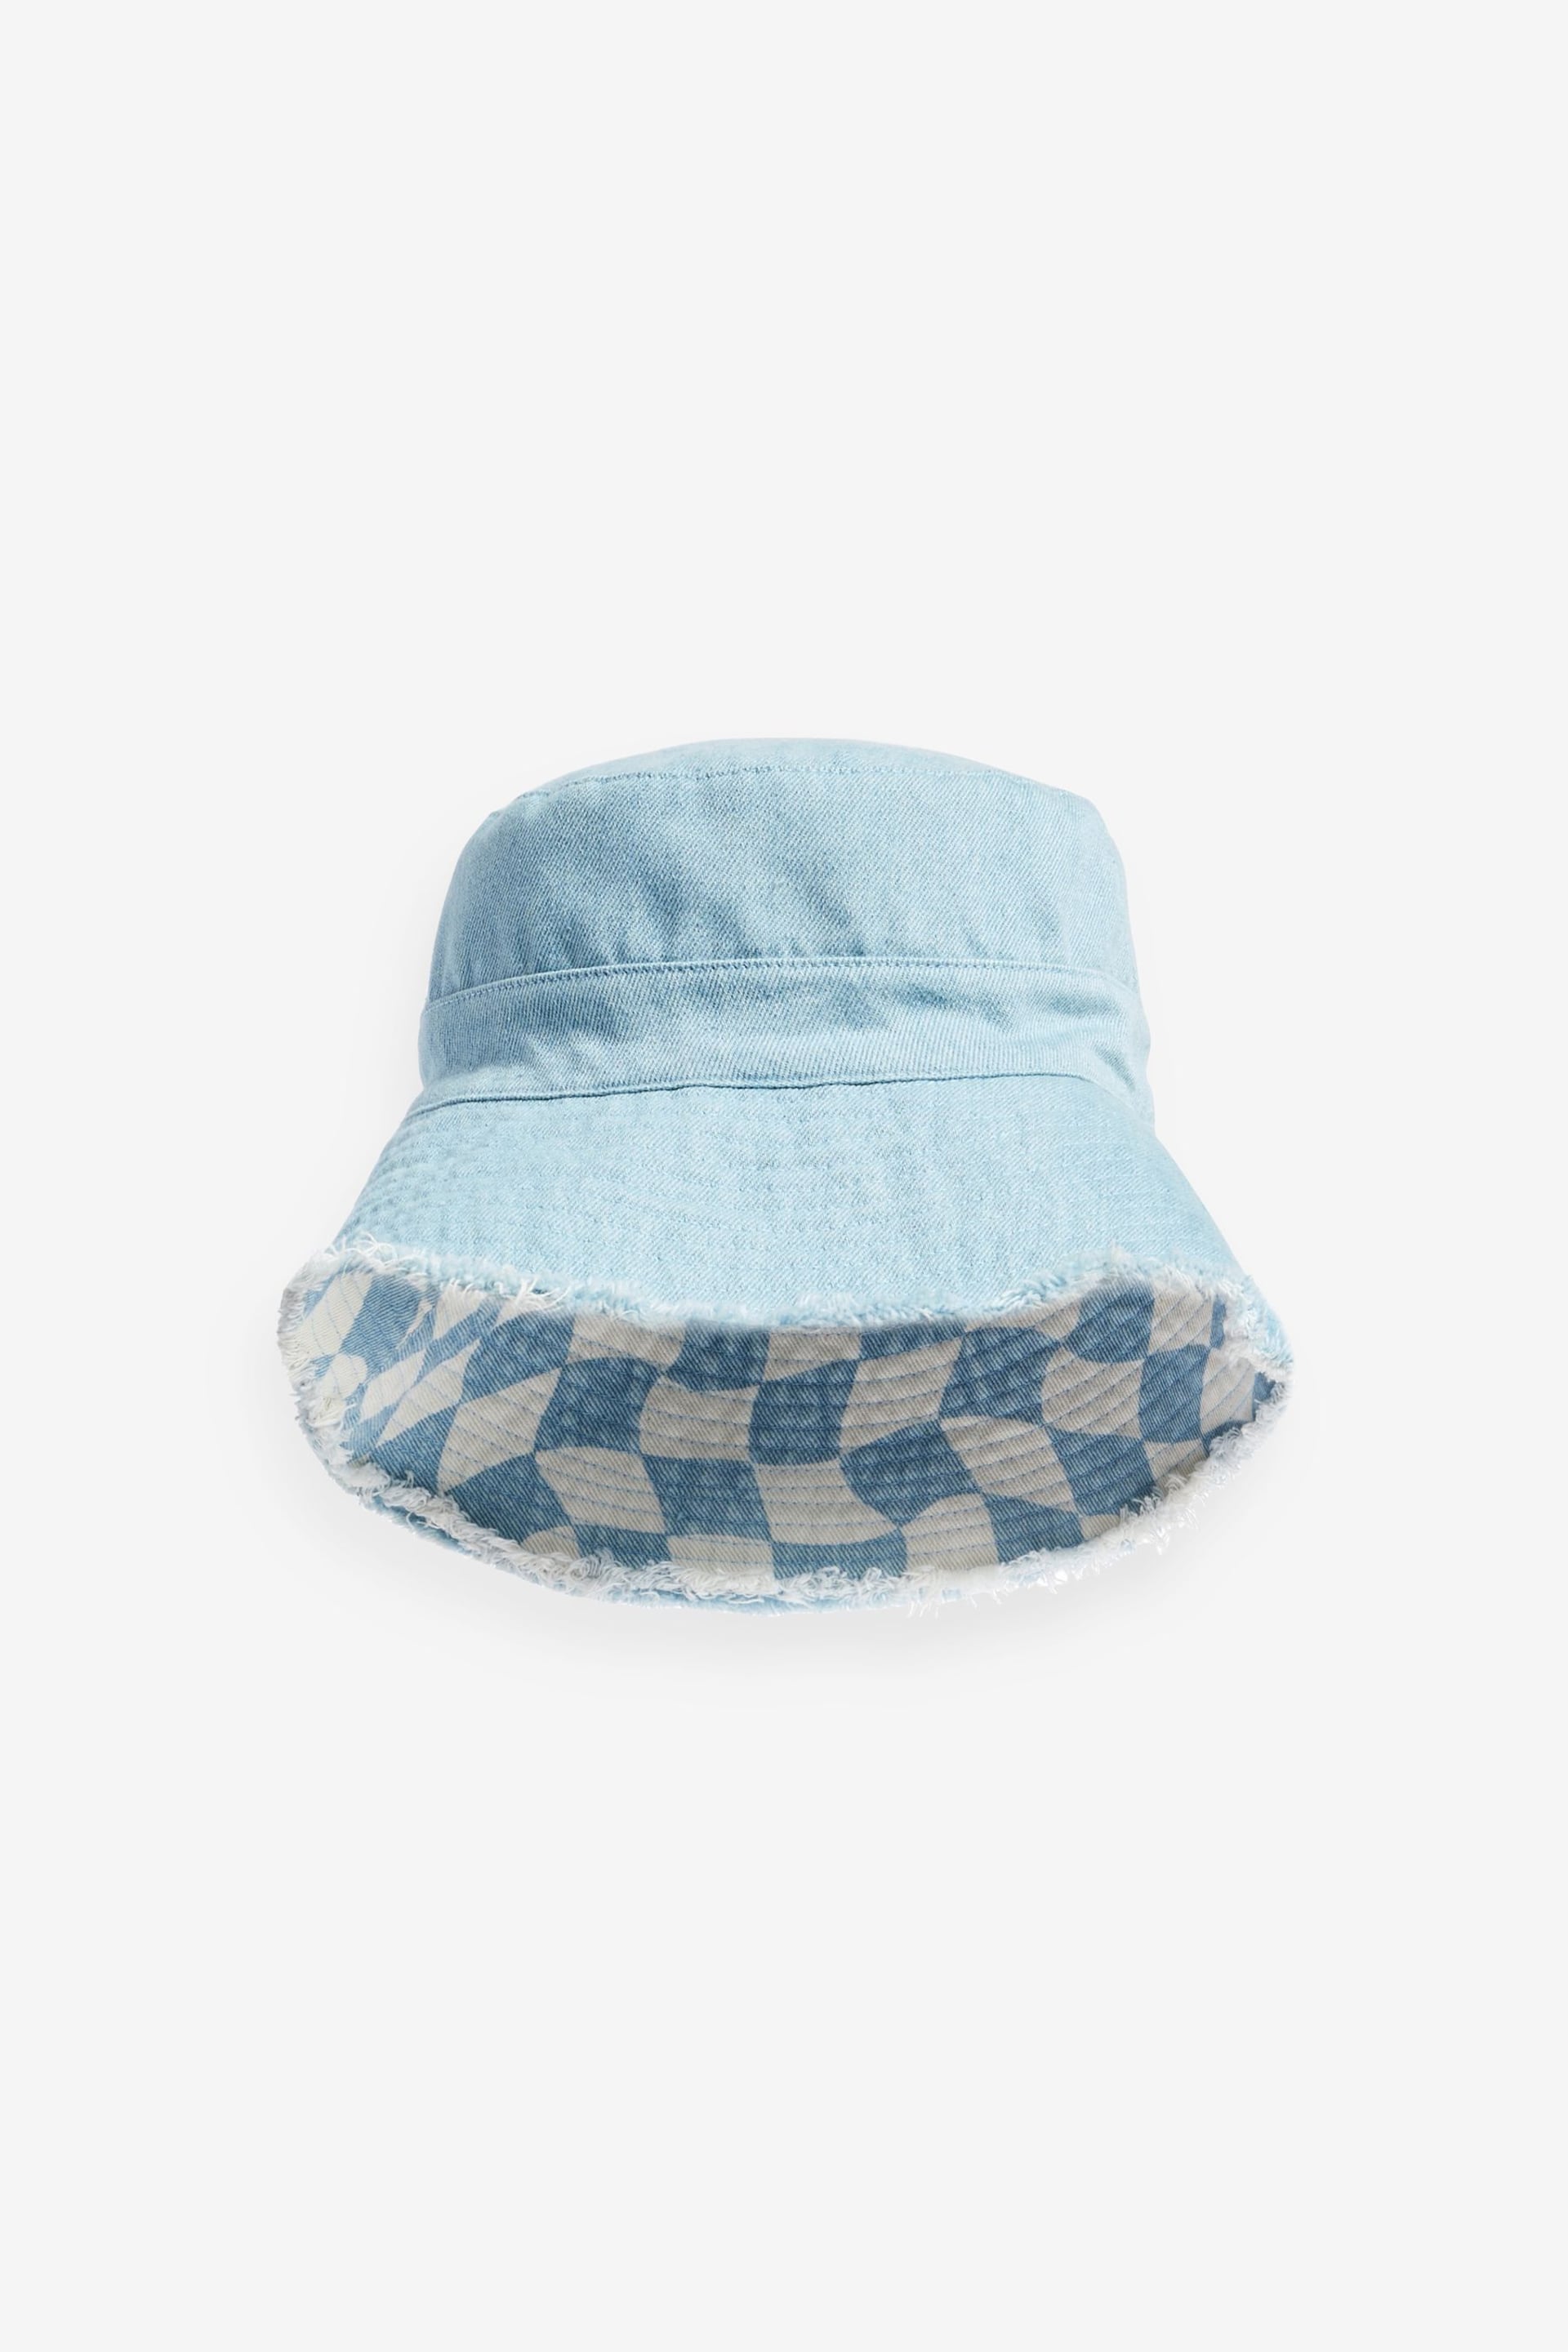 Blue/Checkerboard Reversible Bucket Hat - Image 6 of 6